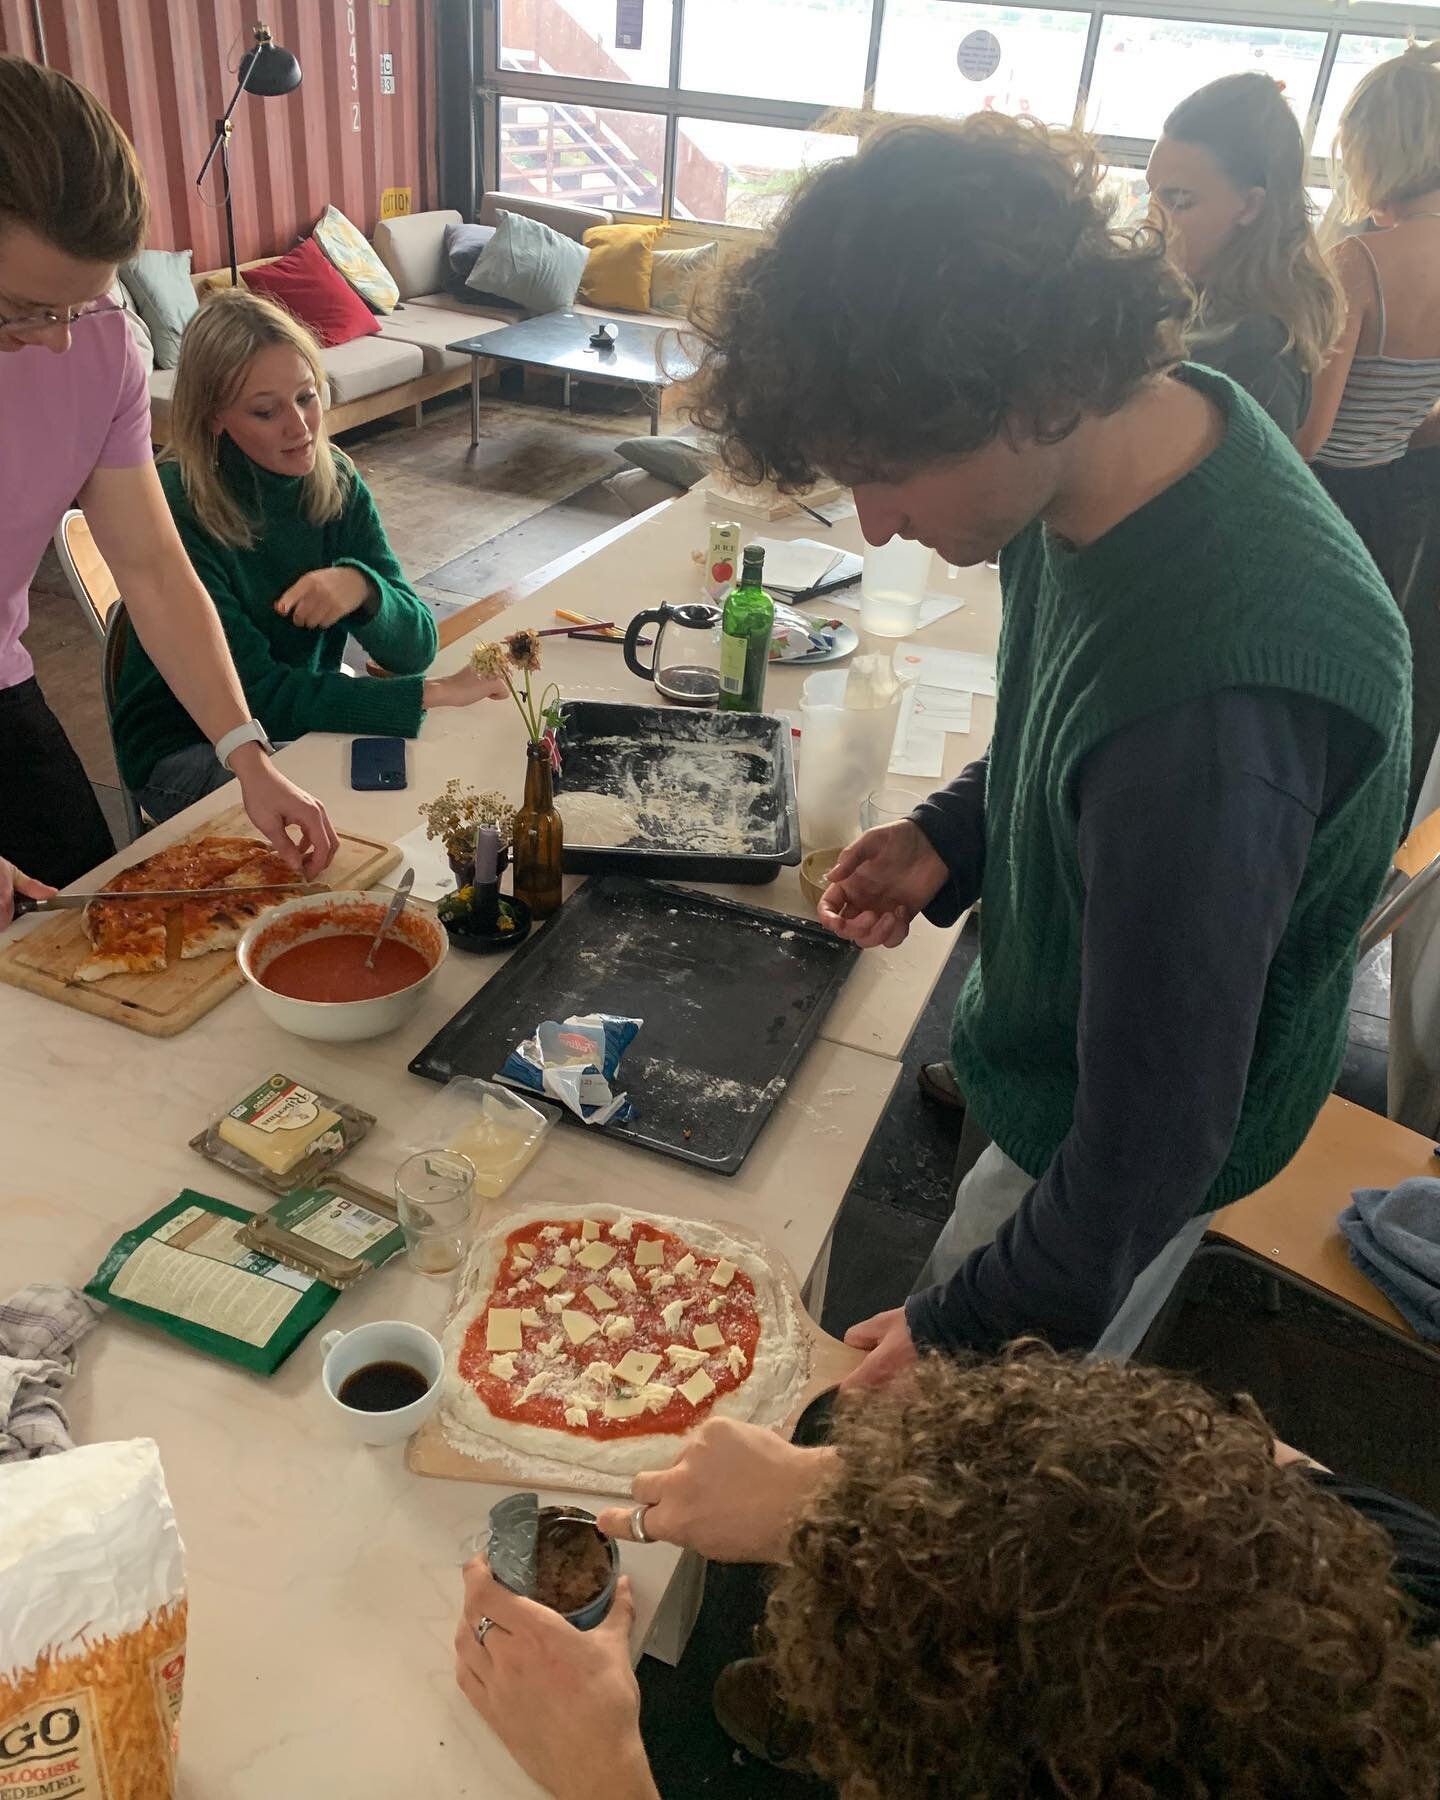 Refshale&oslash;en villager @maxhabel did it again 🍕 Thank you for hosting another Sourdough Workshop and inviting your fellow villagers into the beautiful world of sourdough pizza!

The event was supported by the Village Community Creator Fund - a 